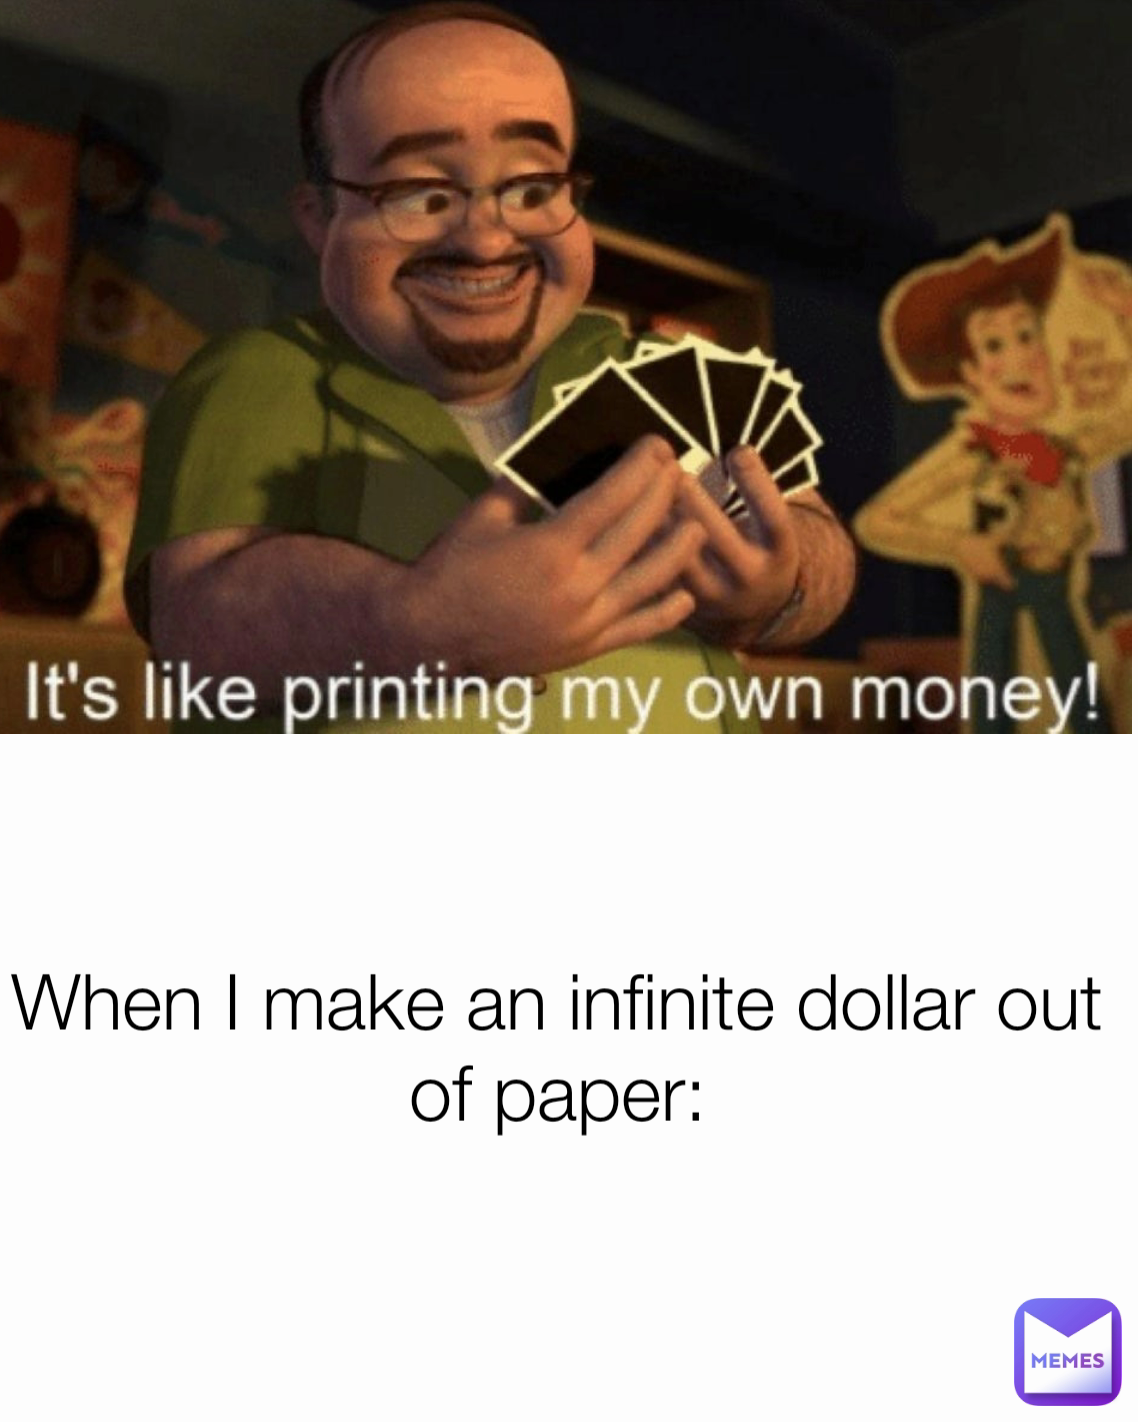 When I make an infinite dollar out of paper: